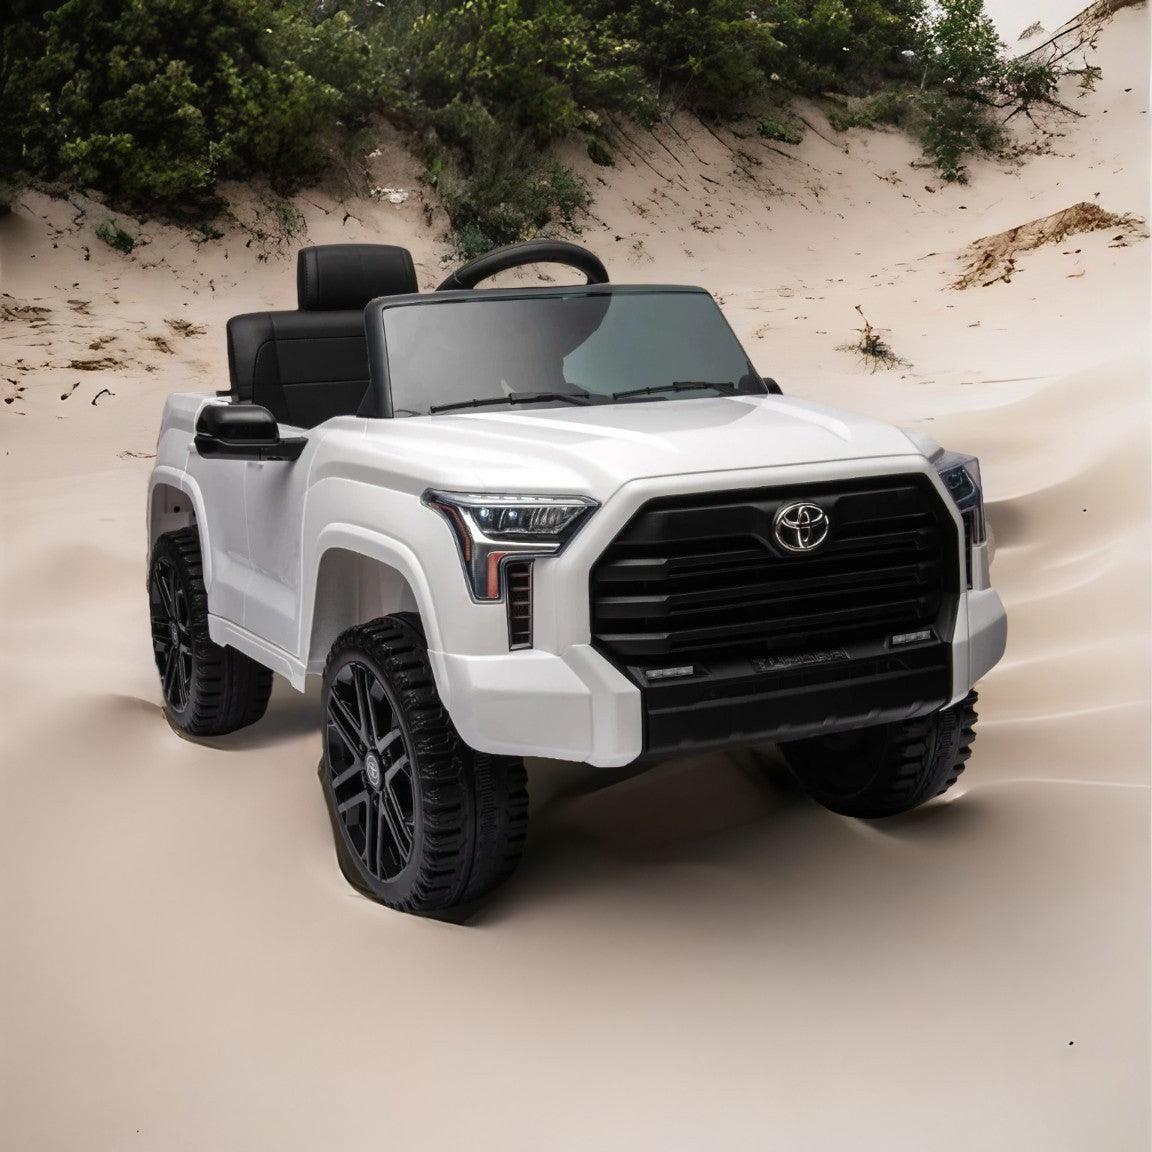 🆓🚛 Officially Licensed Toyota Tundra Pickup, Electric Pickup Car Ride On for Kid, 12V Electric Ride On Toy, 2.4G W/Parents Remote Control, Electric Car for Kids, Three Speed Adjustable, Power Display